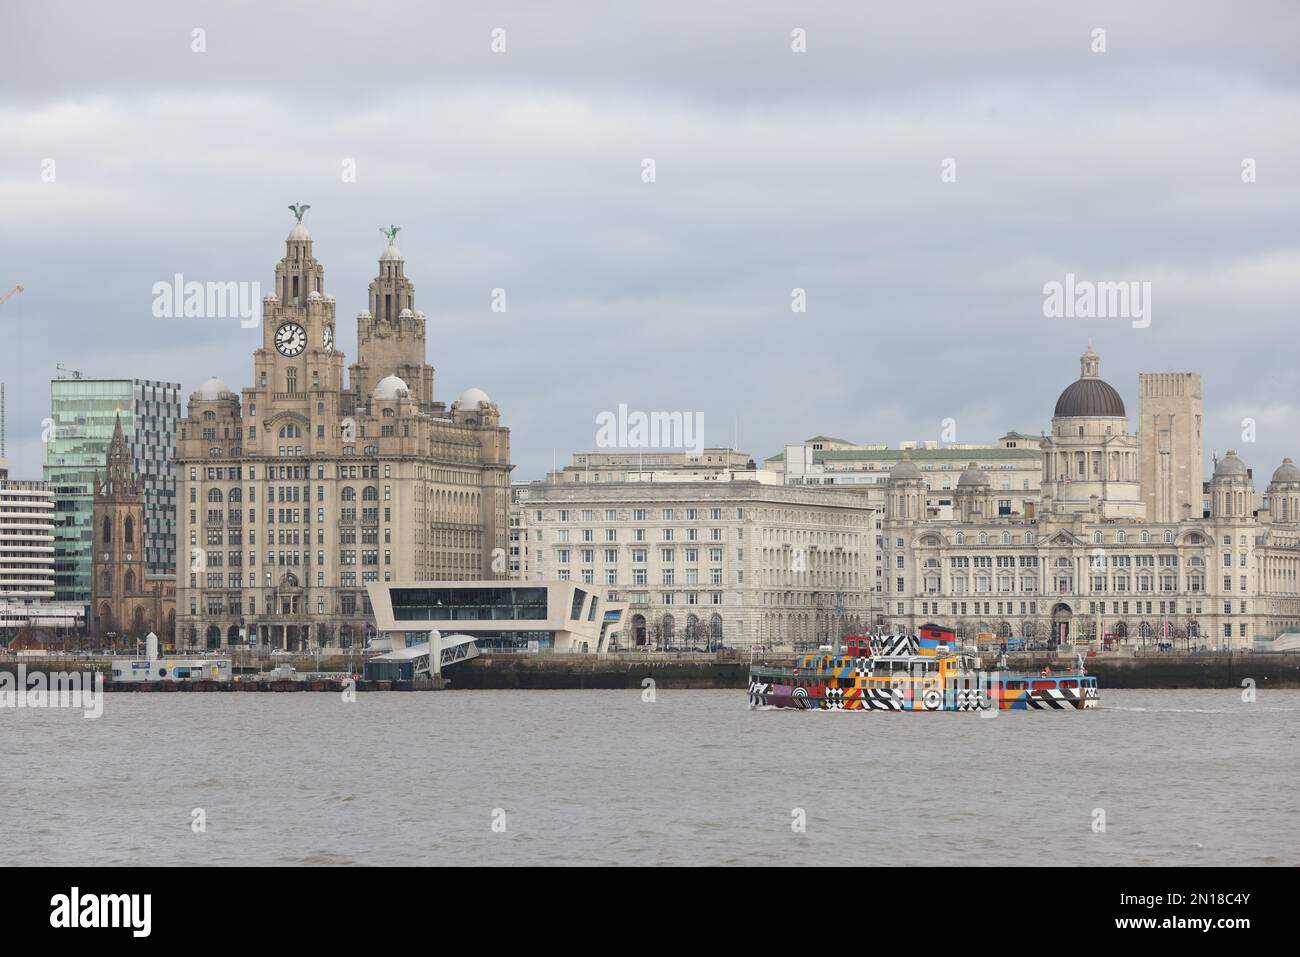 General views of Liverpool dockside buildings including the Royal Liver Building, Museum of Liverpool, ACC Convention centre, M&S Bank arena, UK. Stock Photo